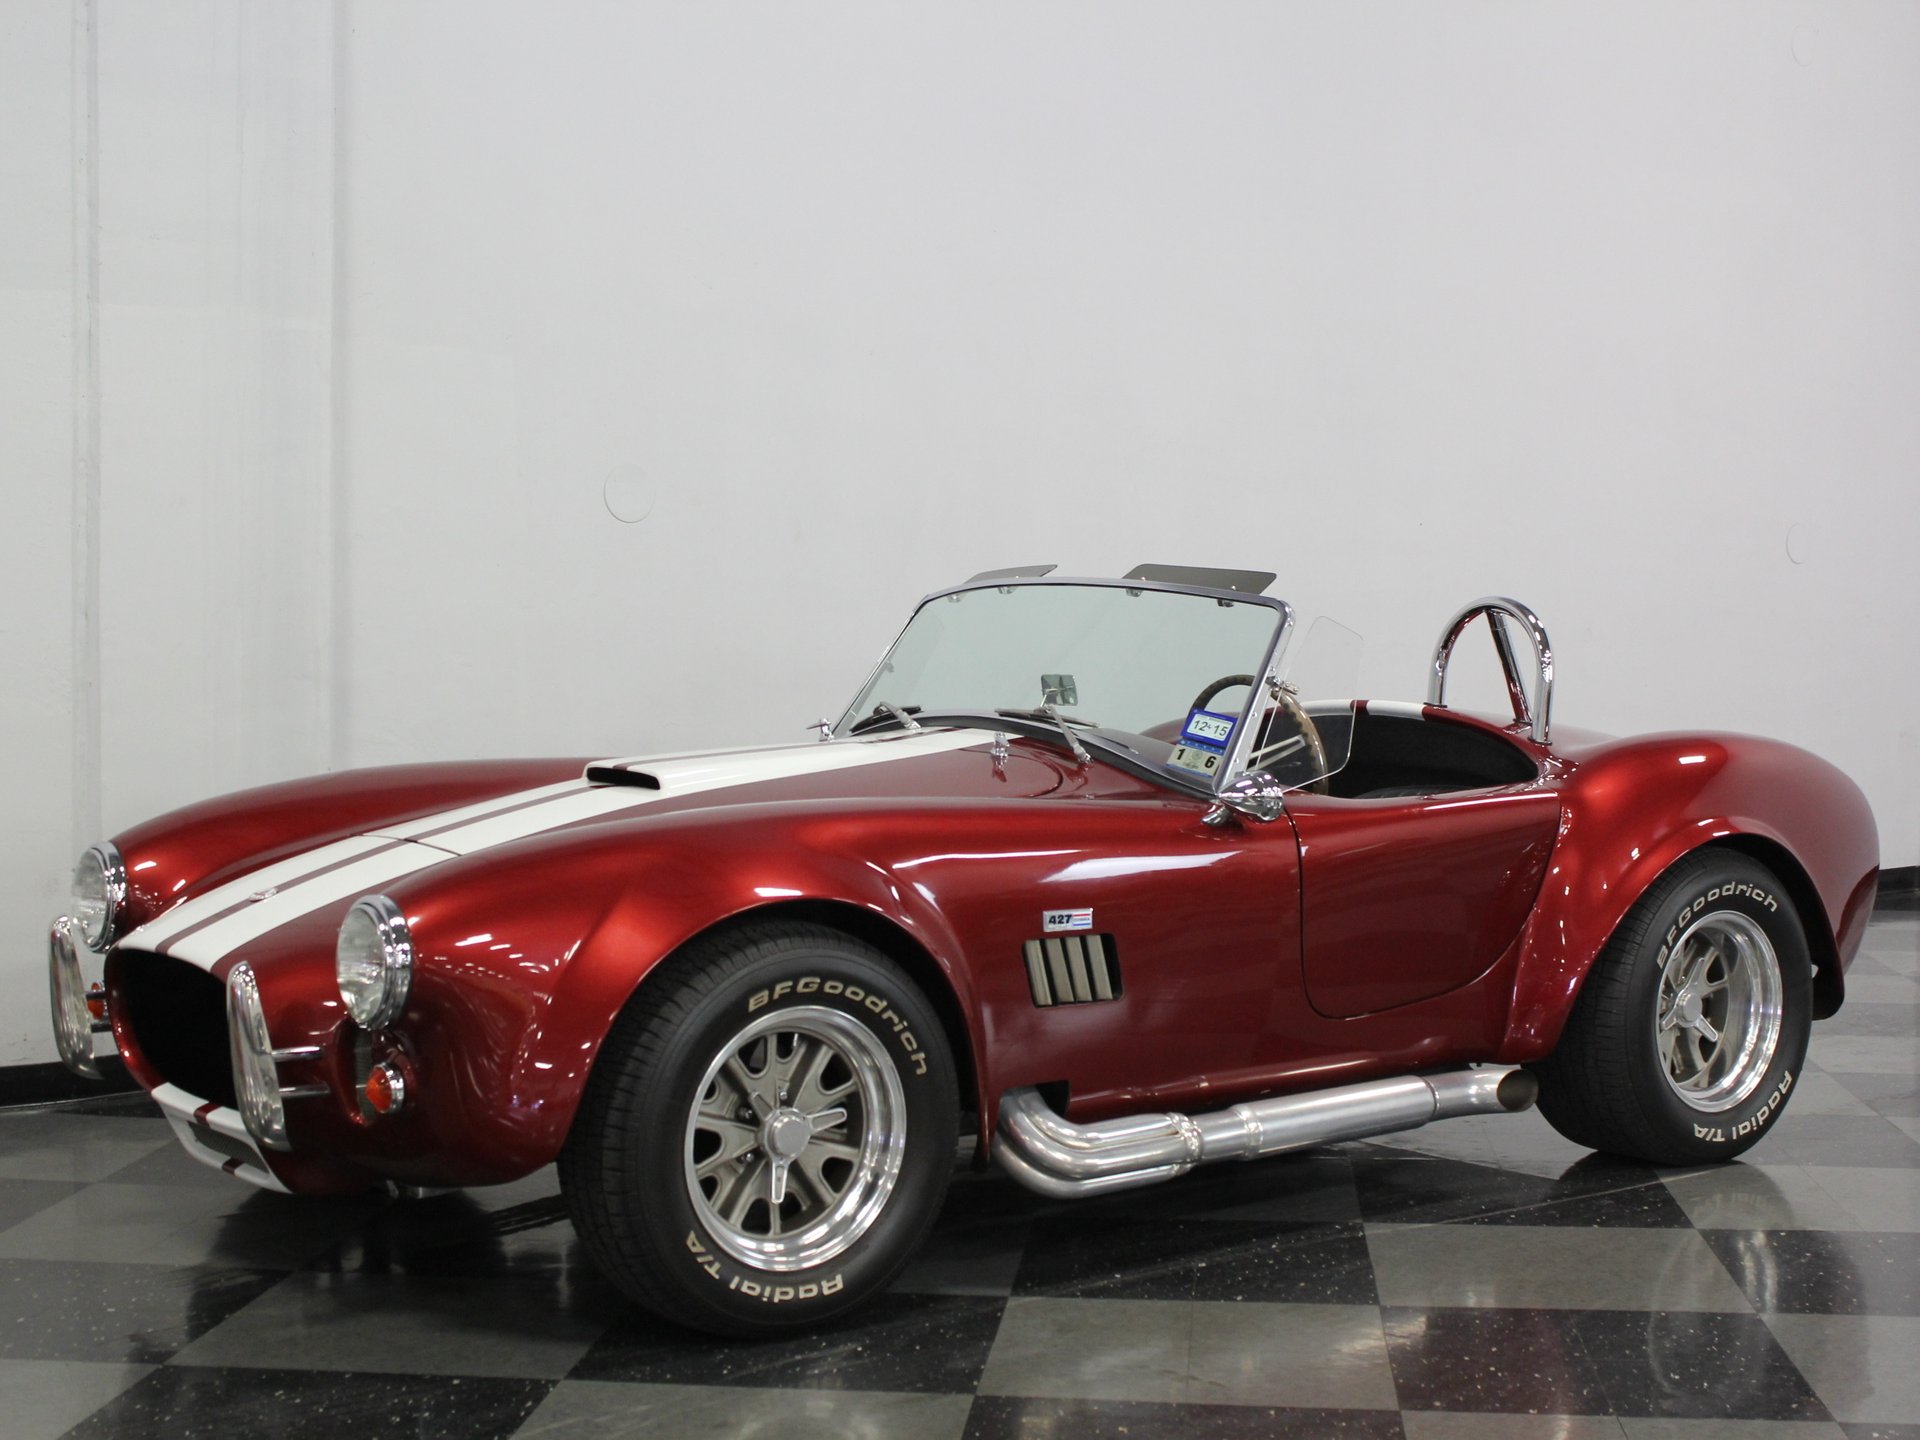 At placere Udveksle Rektangel 1967 Shelby Cobra | Classic Cars for Sale - Streetside Classics